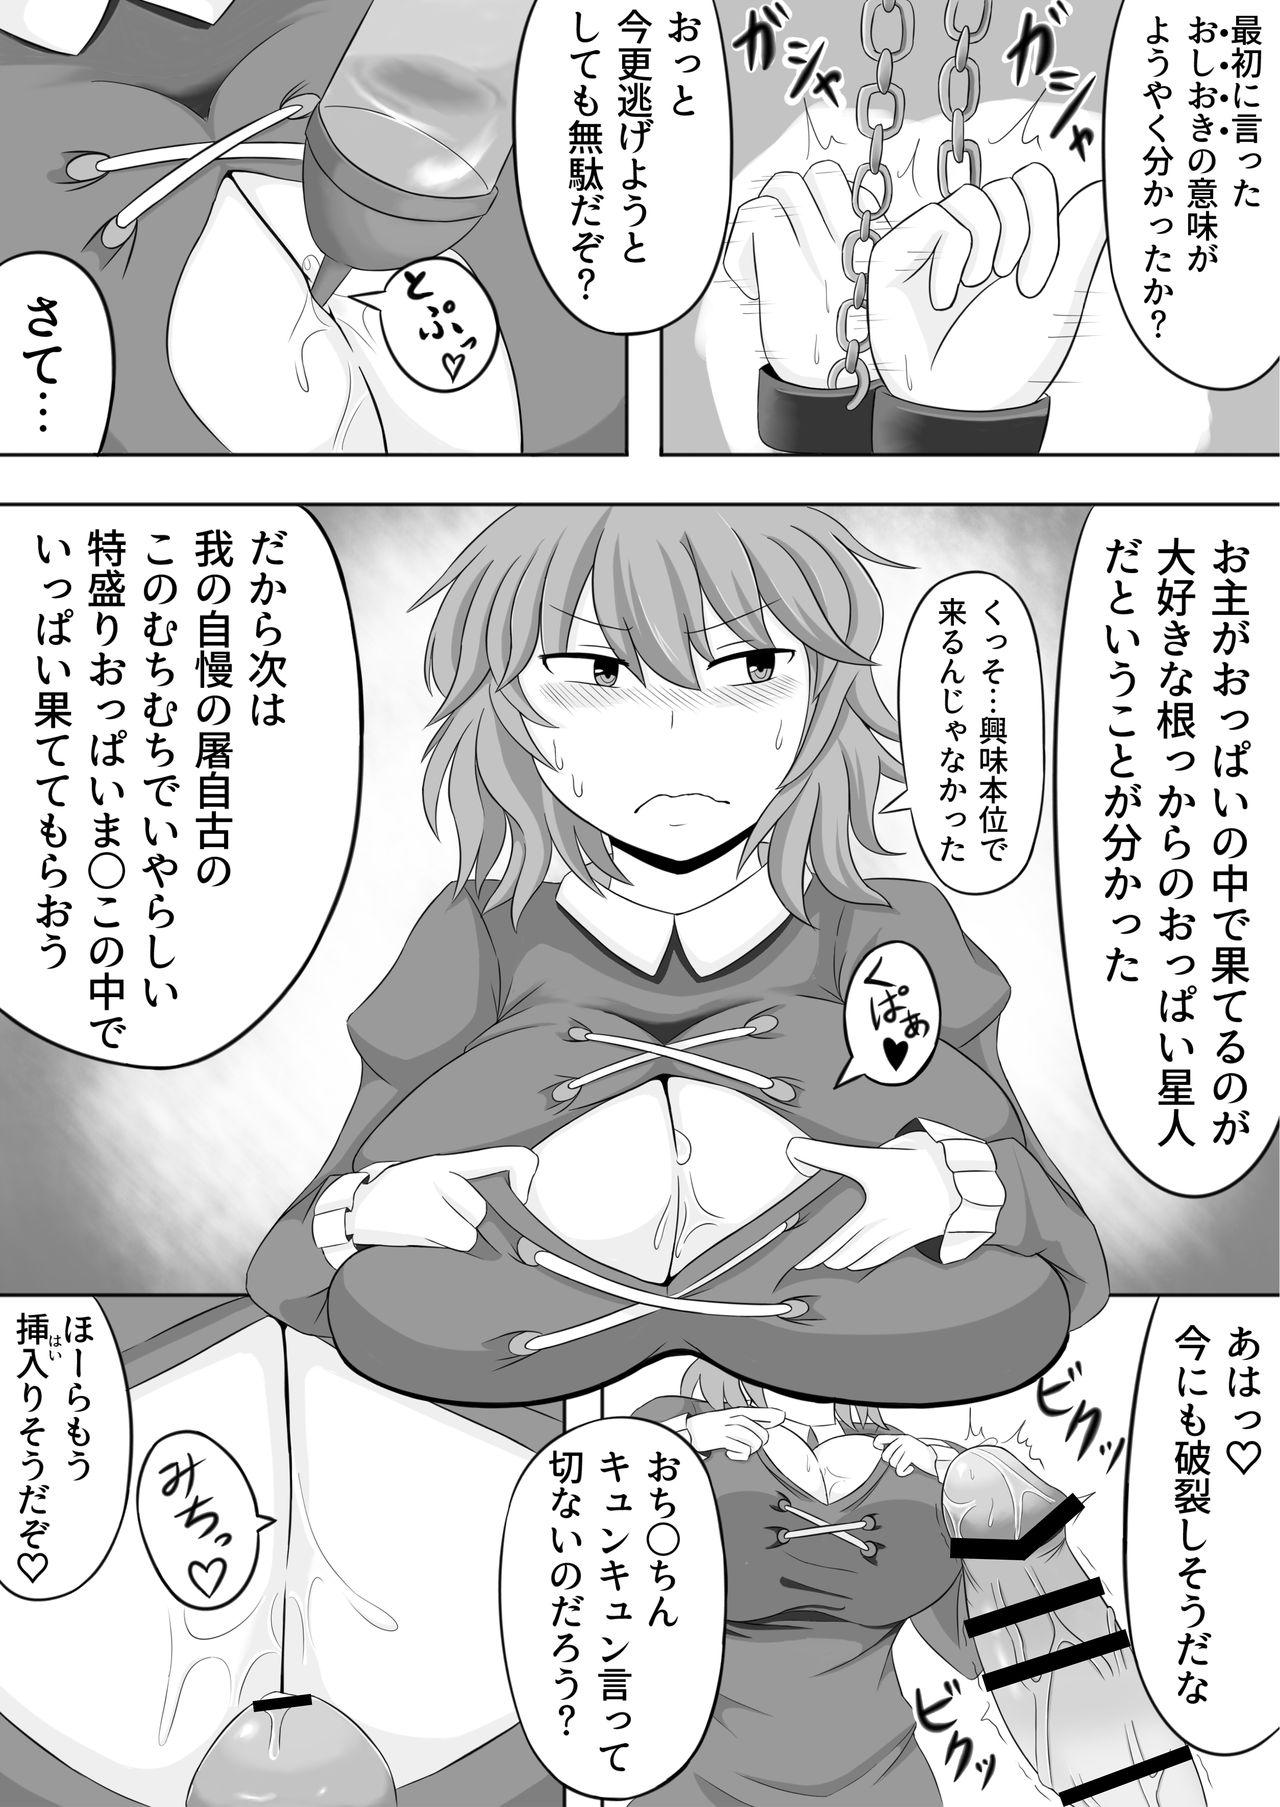 Webcam ふととじ搾り - Touhou project Hot Girls Fucking - Page 5